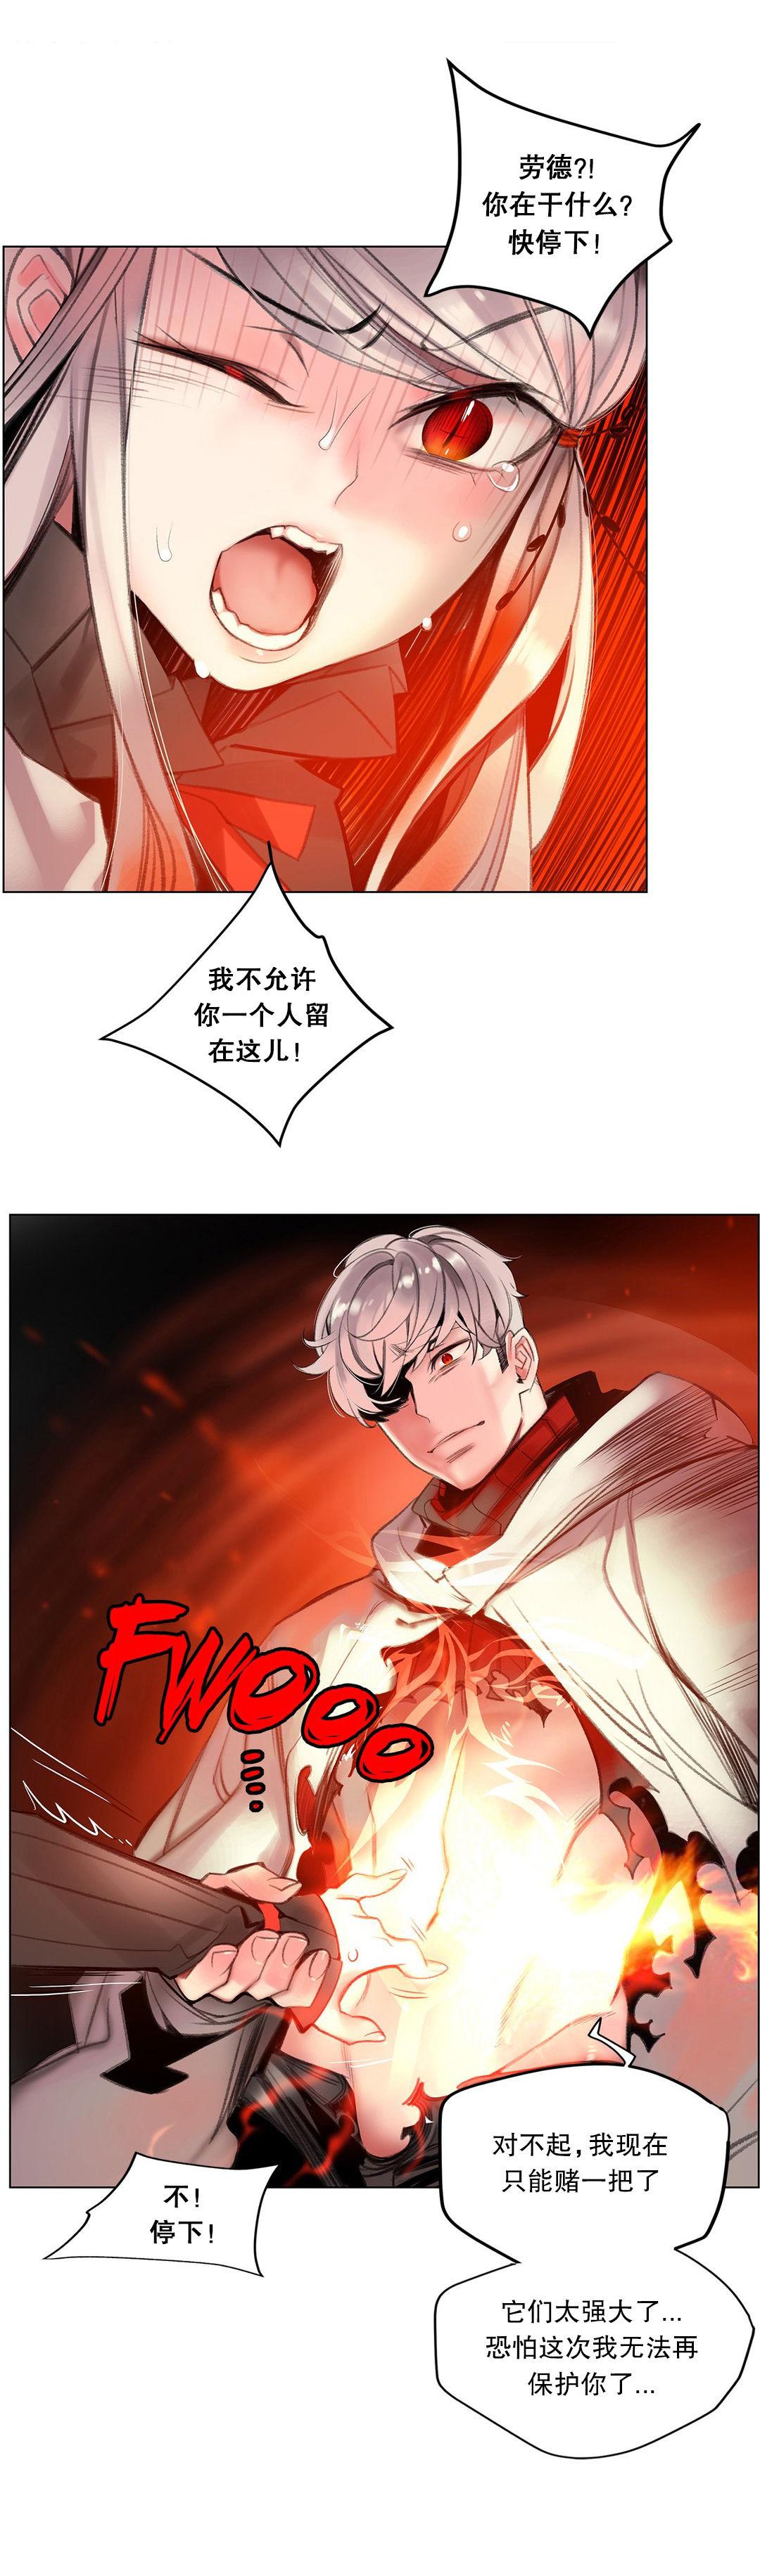 [Juder] Lilith`s Cord (第二季) Ch.61-68 [Chinese] [aaatwist个人汉化] [Ongoing] 252